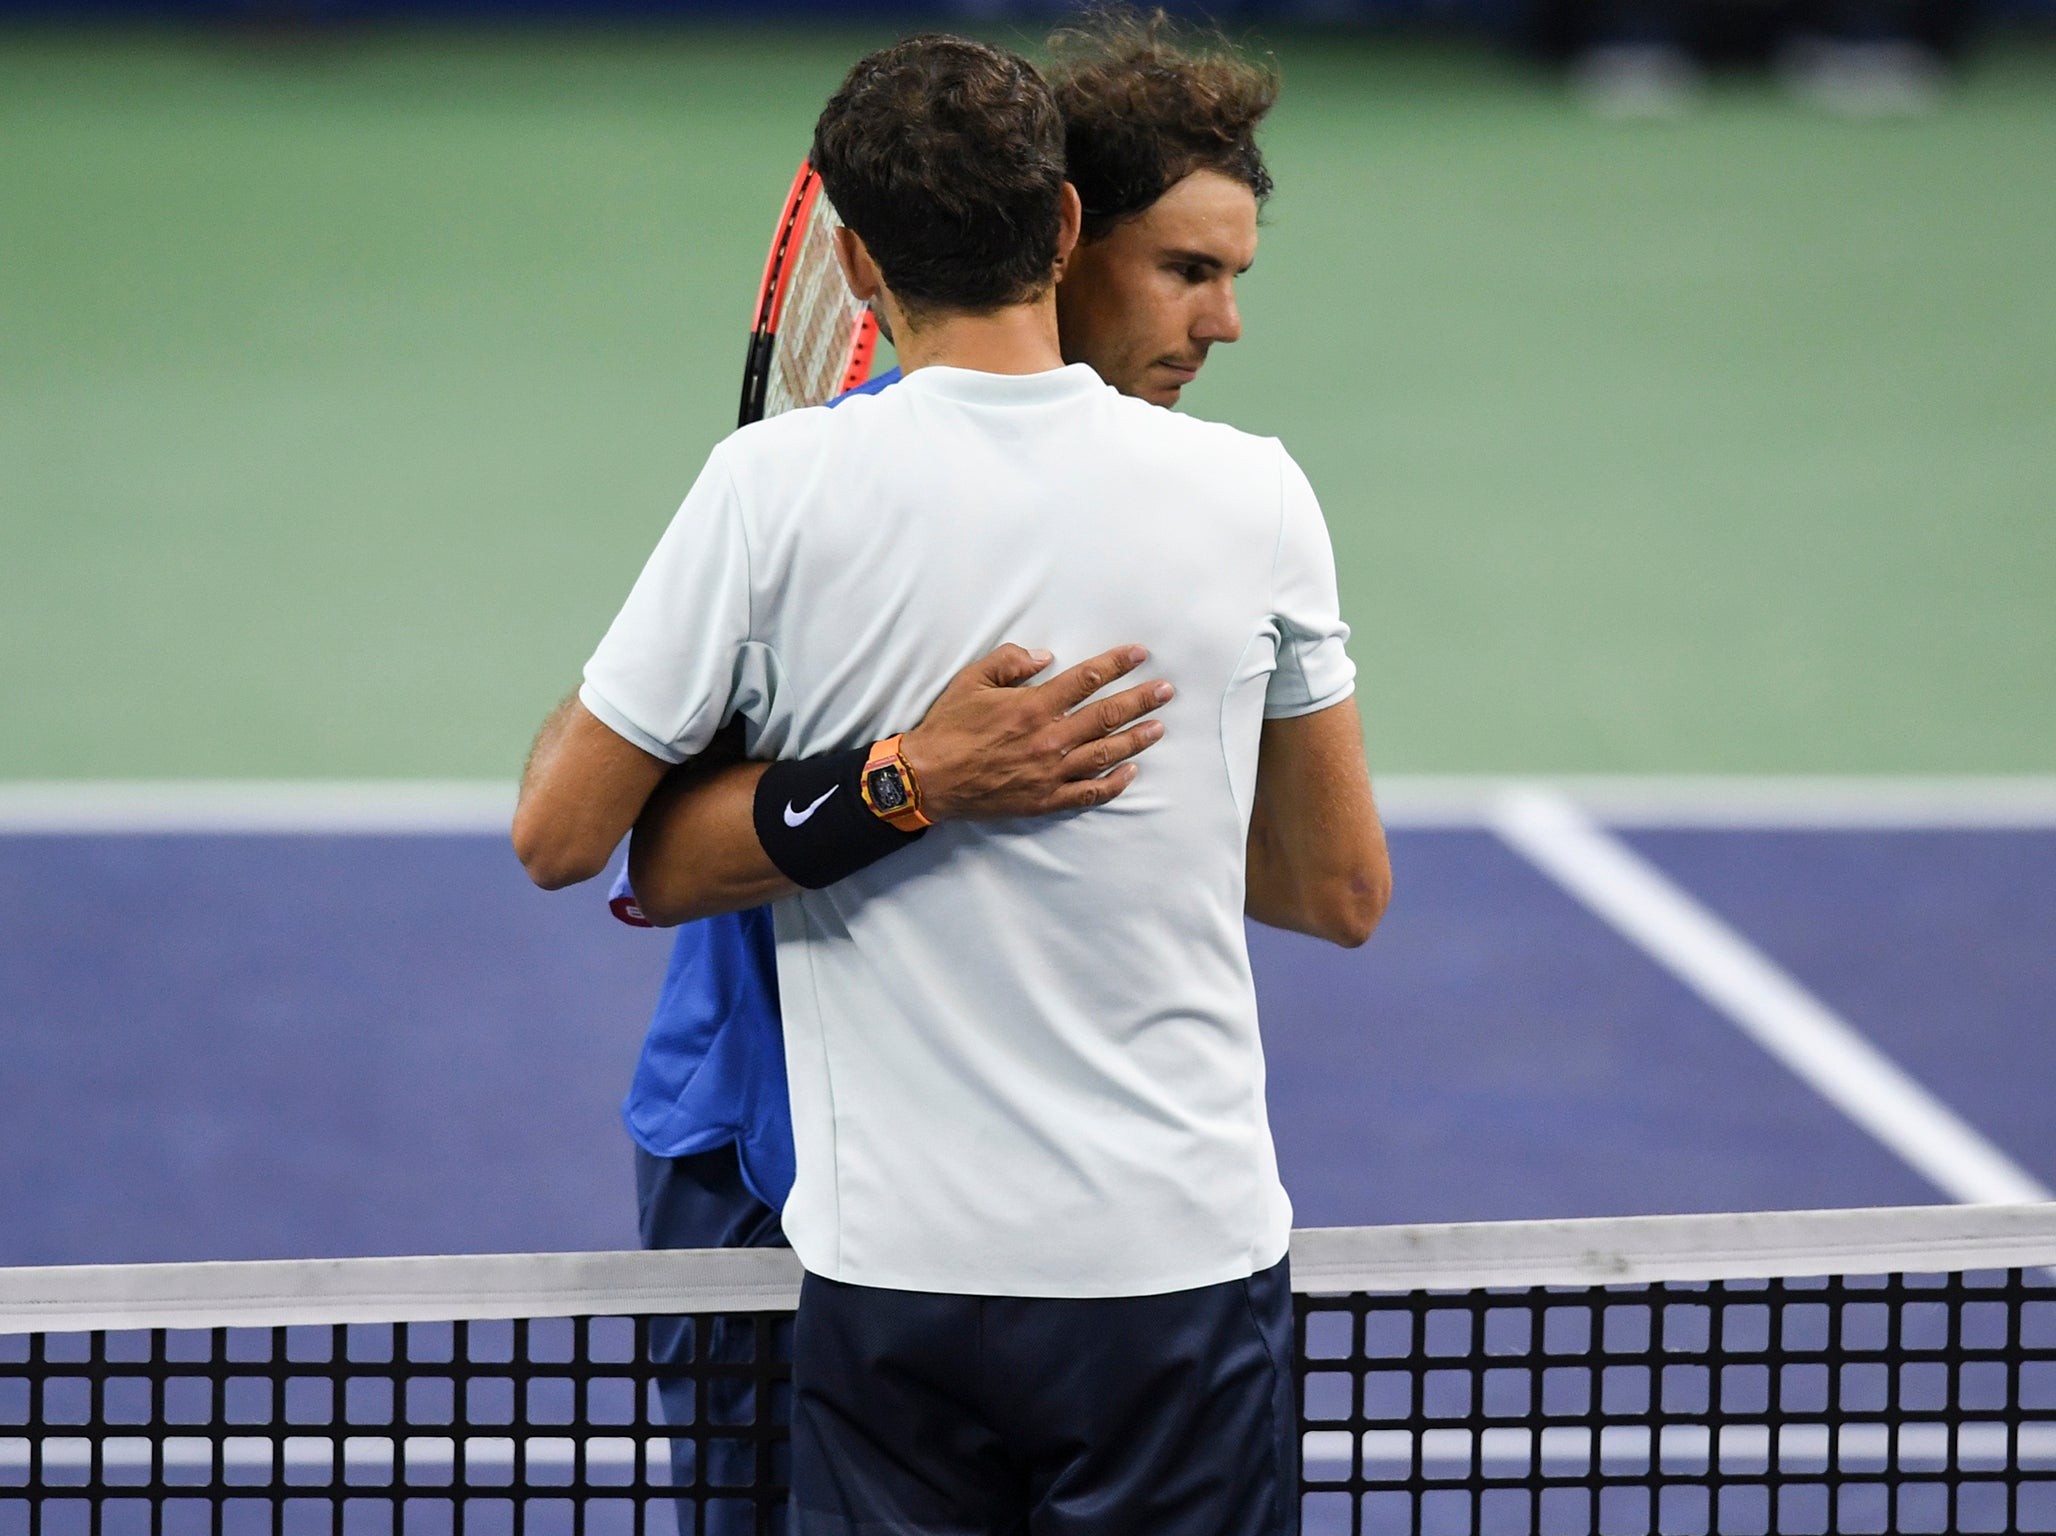 Nadal saw off an inspired Dimitrov